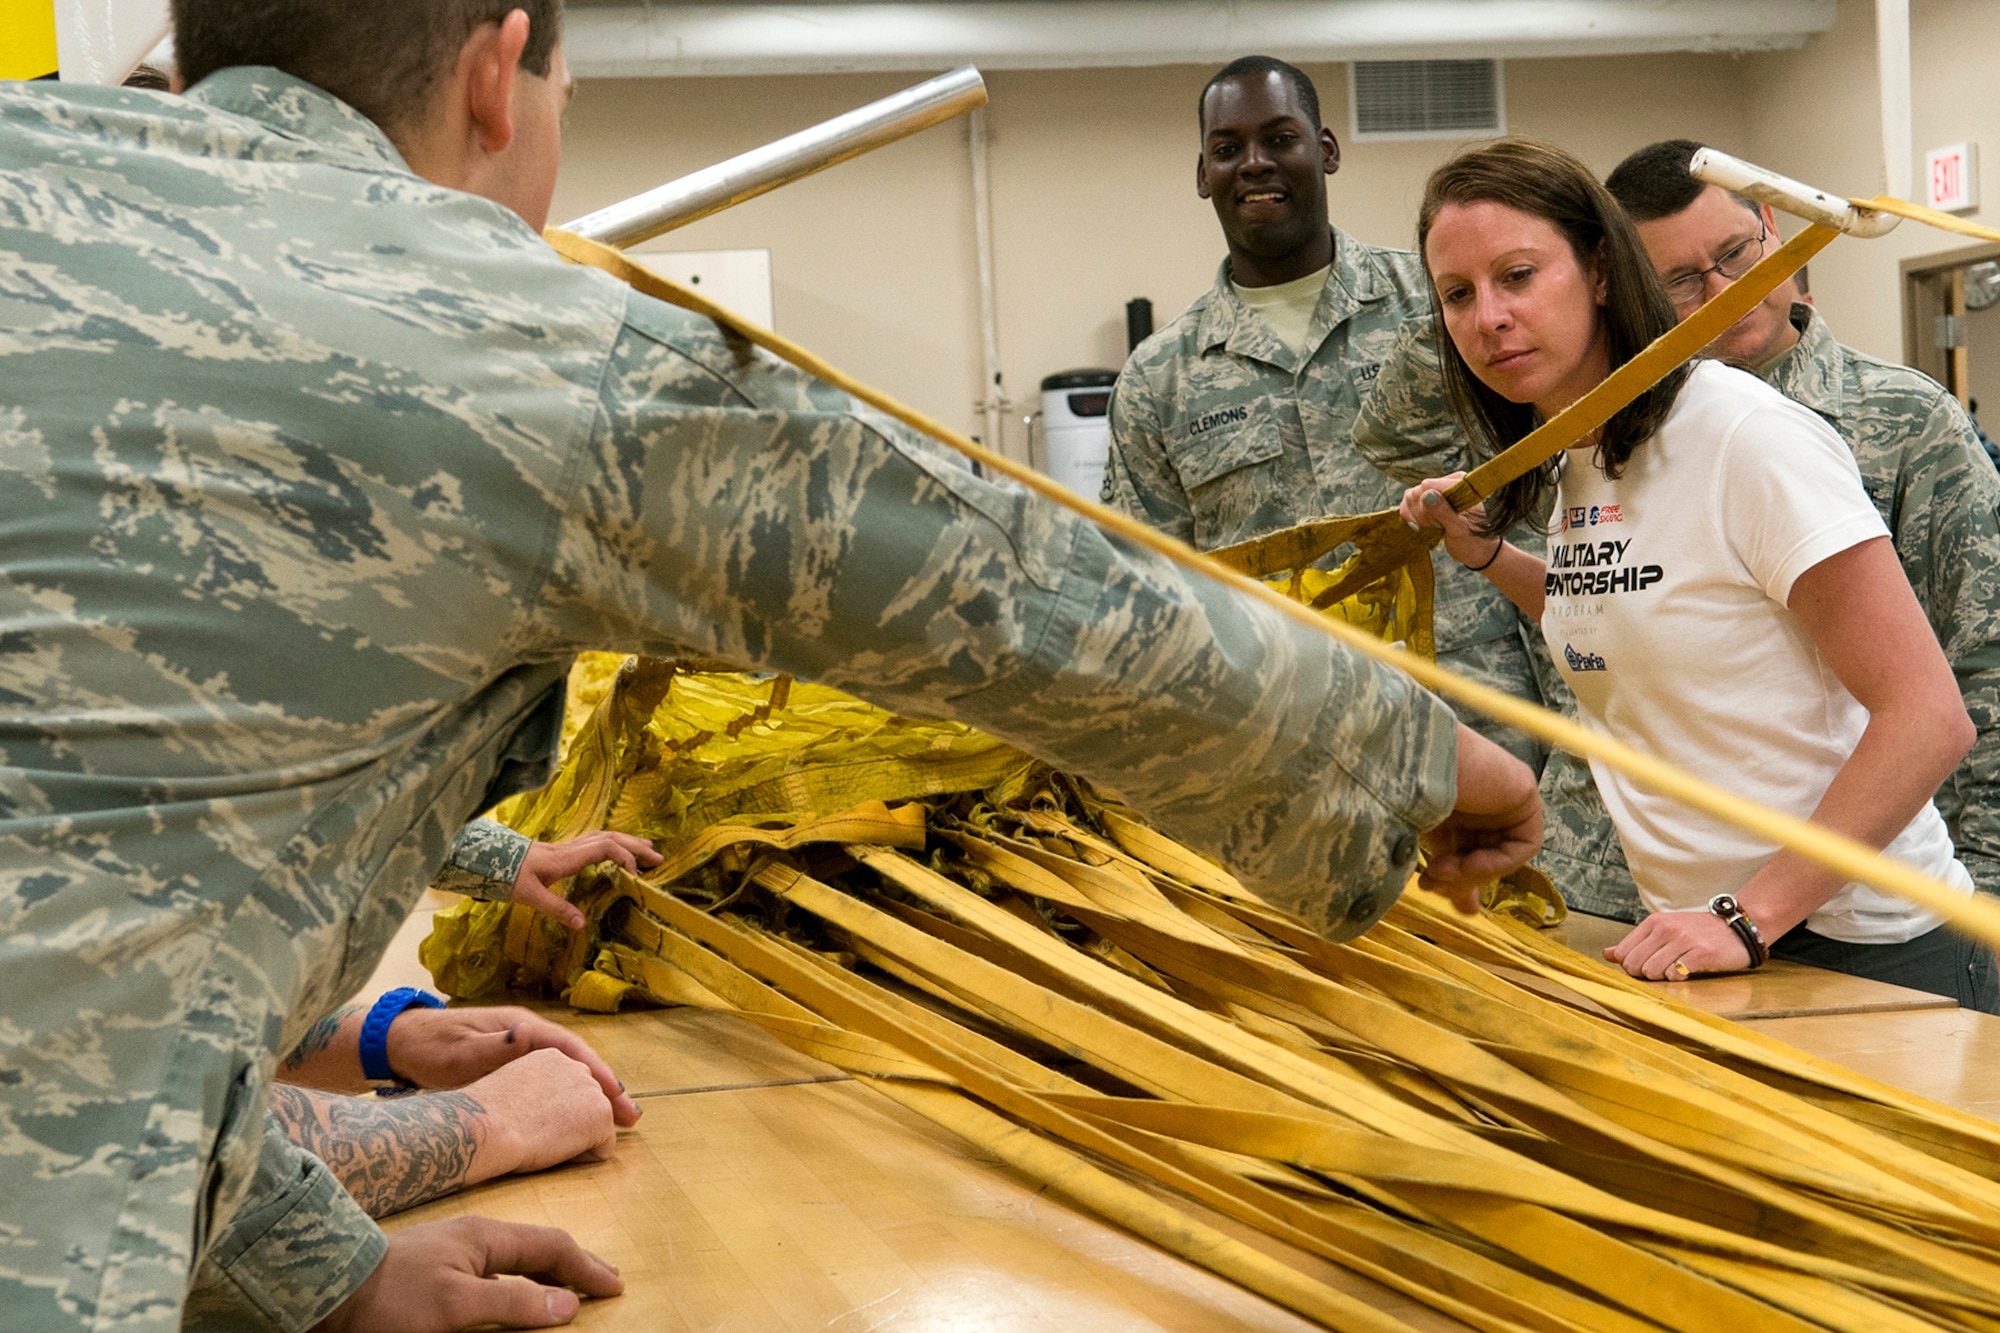 Emily Cook, 3-time Olympian U.S. Freestyle skier, gets instructed on how to pack a B-52H Stratofortress drag chute during a tour of the 307th Operations Support Flight aircrew flight equipment shot, June 4, 2014, Barksdale Air Force Base, La. Cook is part of the American300 Tours, which visits military installations with the goal of increasing resiliency of the troops, their families, and the communities that they live and operate in. (U.S. Air Force photo by Master Sgt. Greg Steele/Released)
